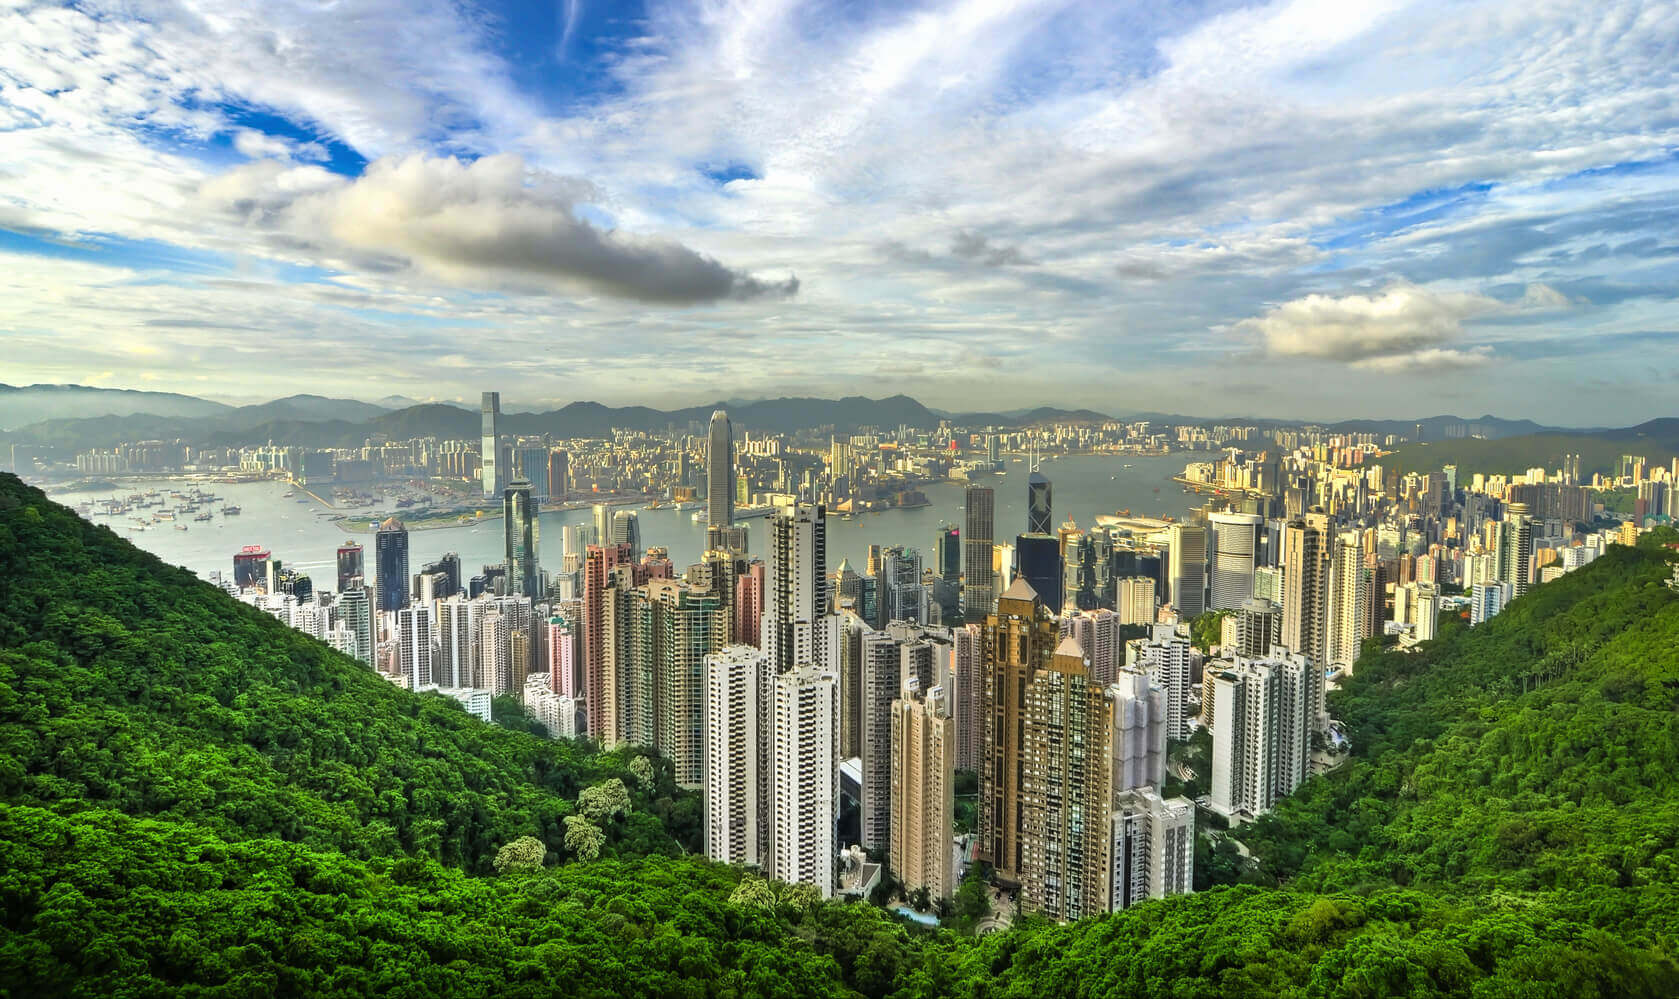 A view from Victoria Peak overlooking Hong Kong